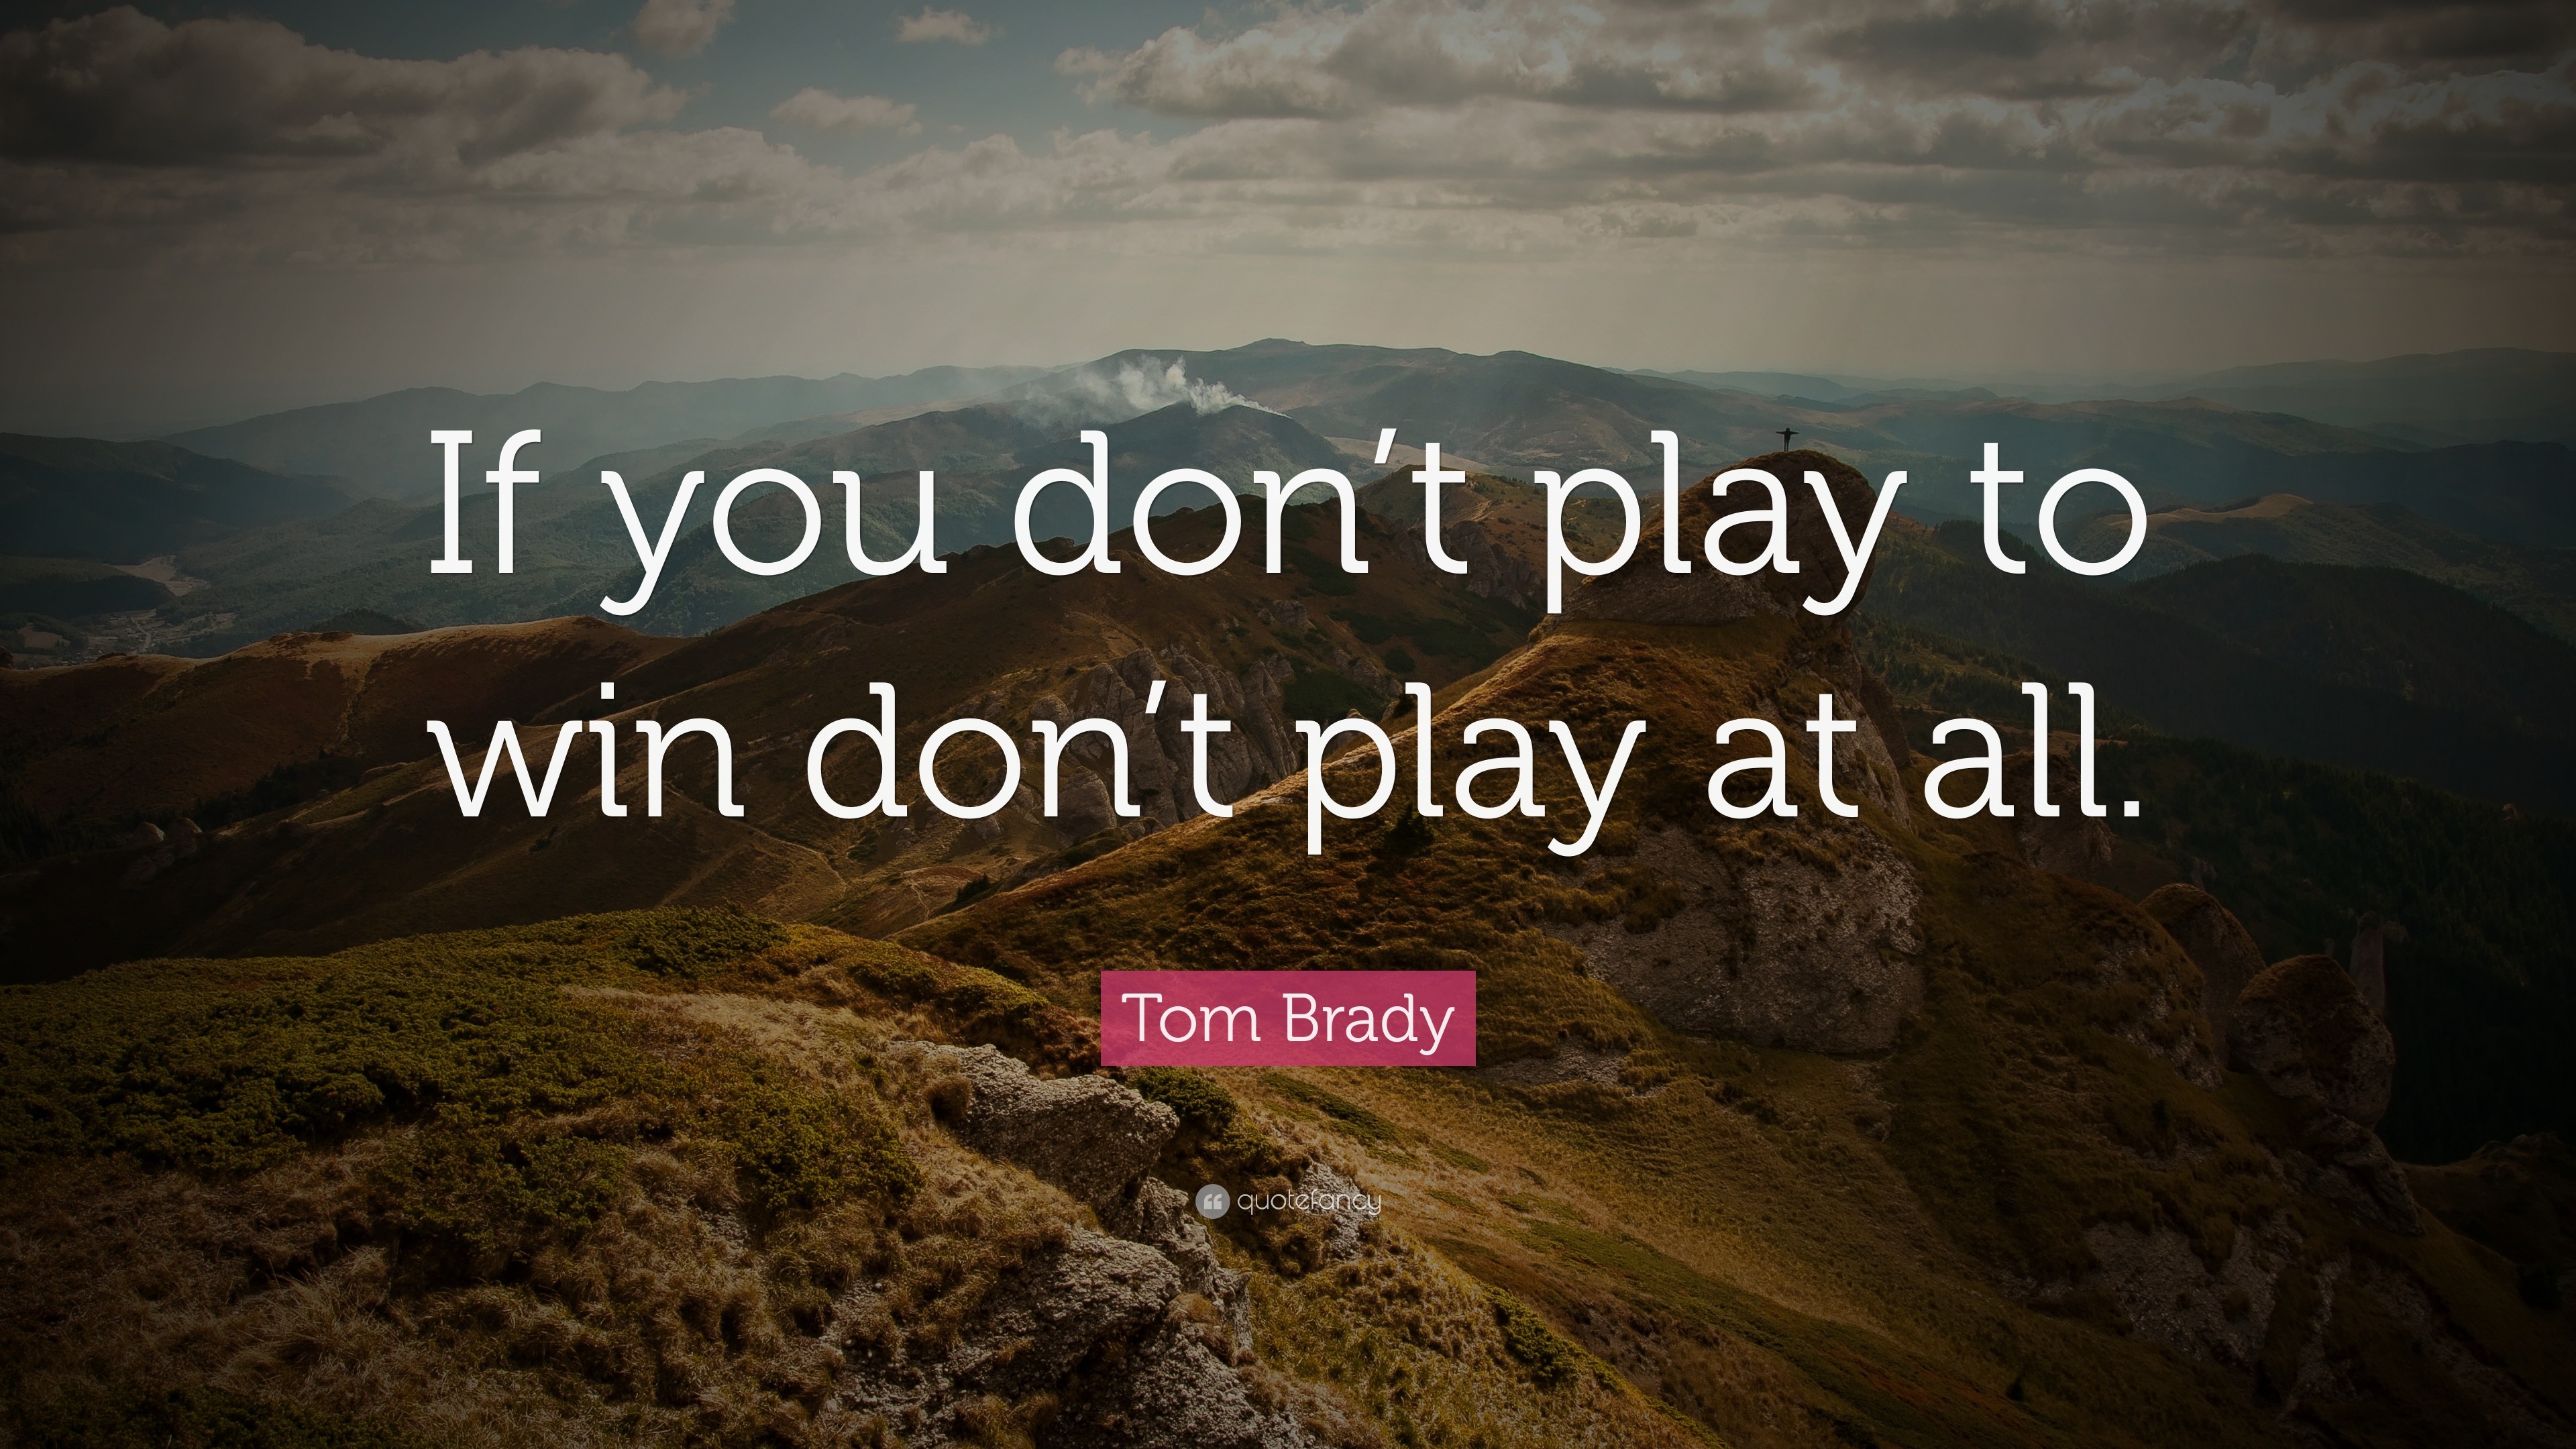 3840x2160 Tom Brady Quote: “If you don't play to win don't